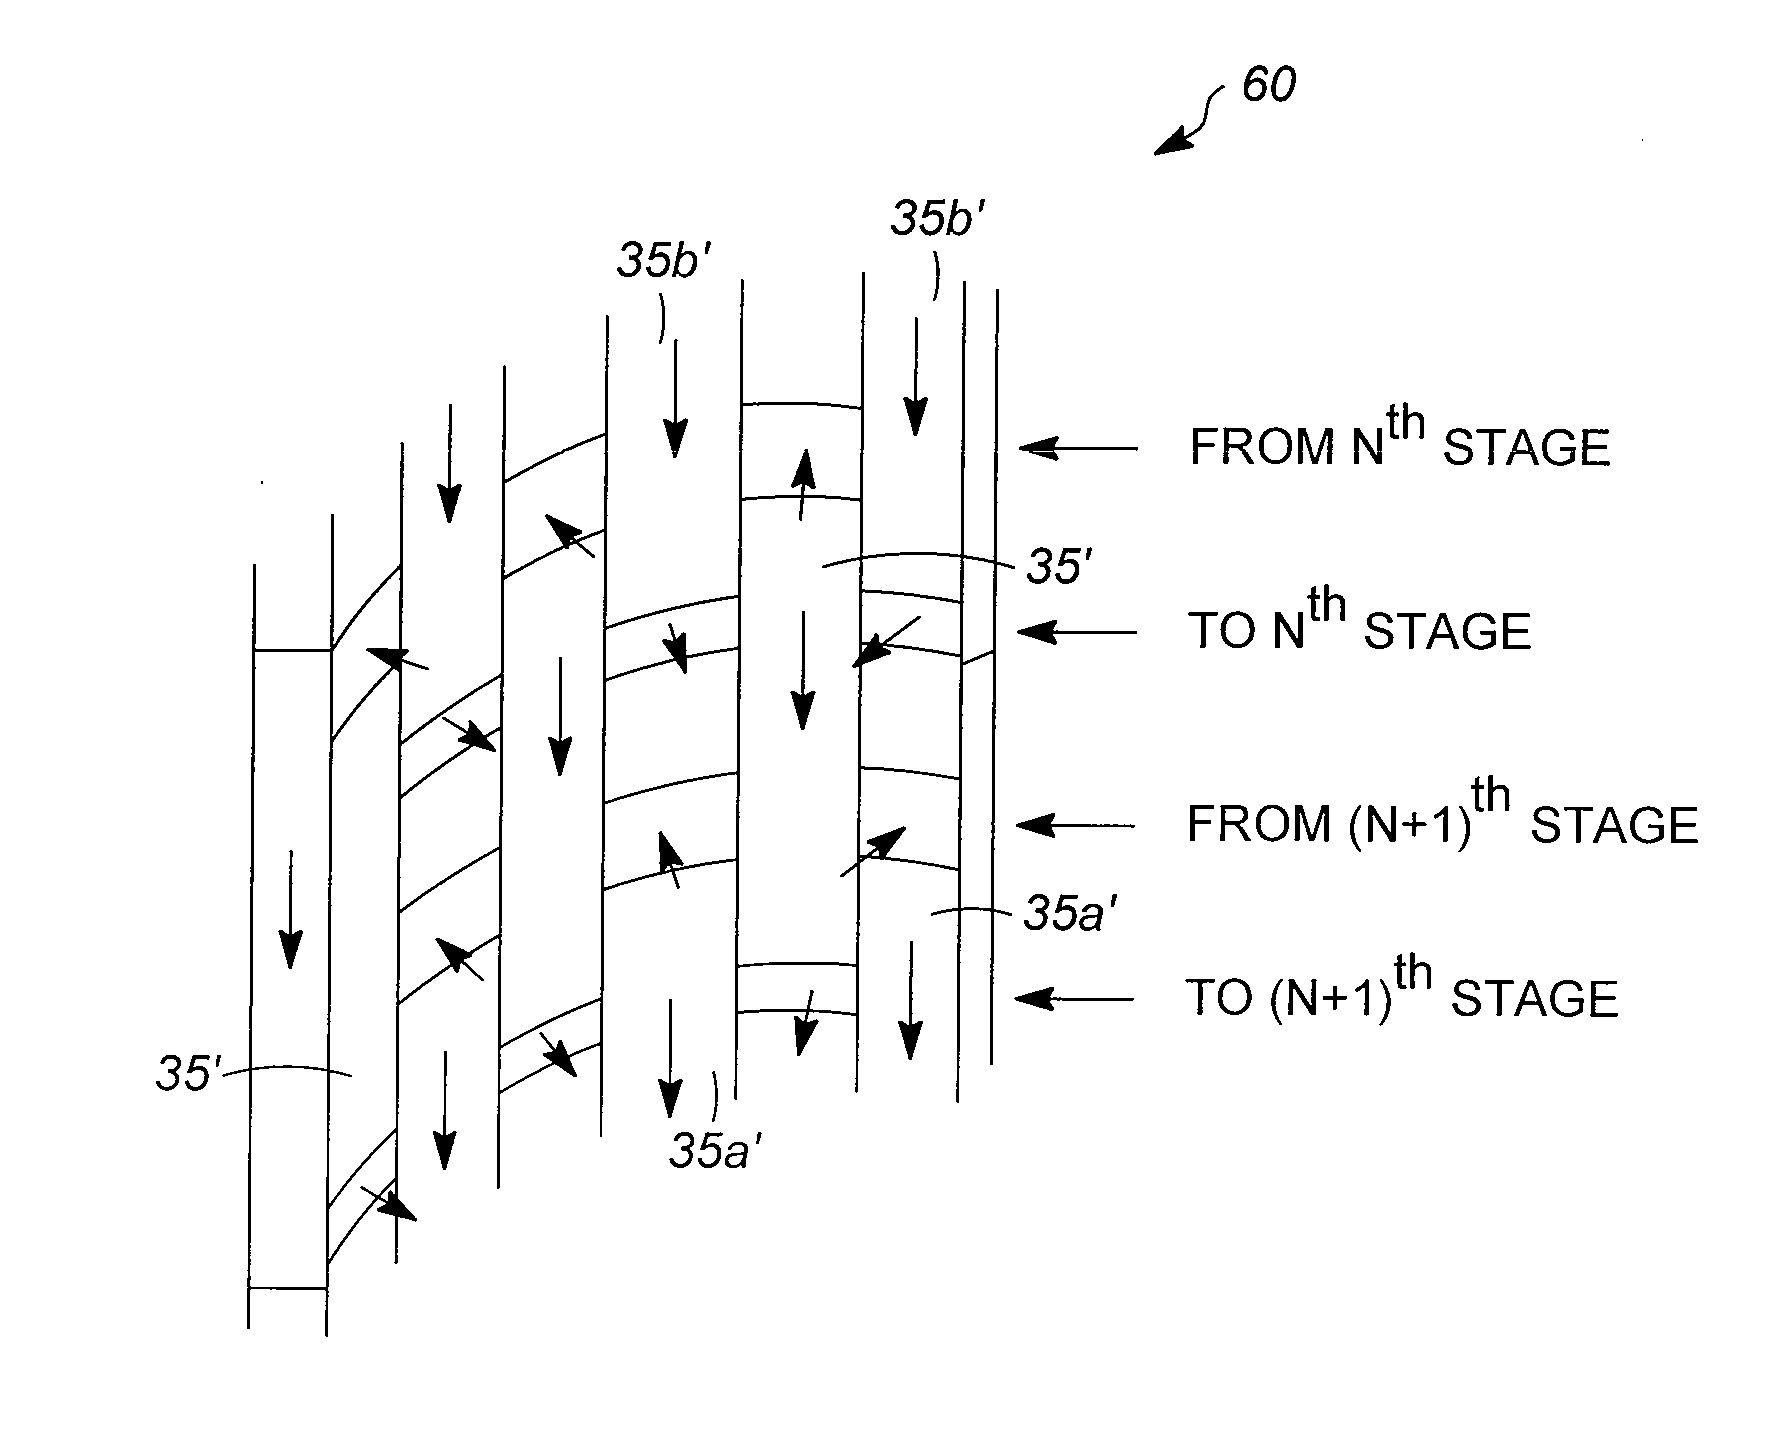 Vapor-Liquid Contacting Apparatuses Having a Secondary Absorption Zone with Vortex Contacting Stages